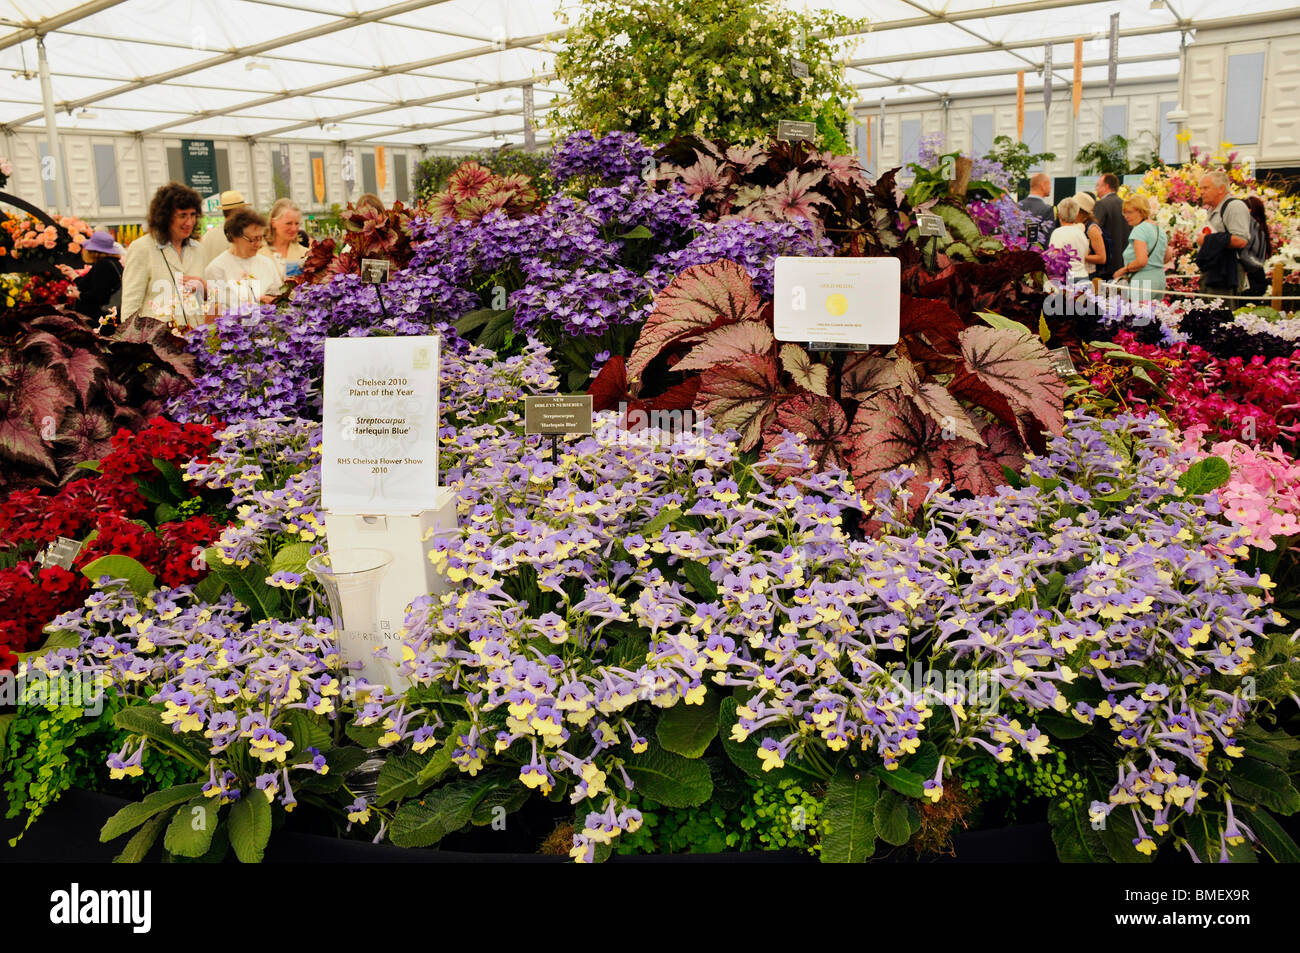 The Harlequin Blue - Streptocarpus, the Chelsea 2010 Plant of the Year at the Chelsea Flower Show 2010 Stock Photo